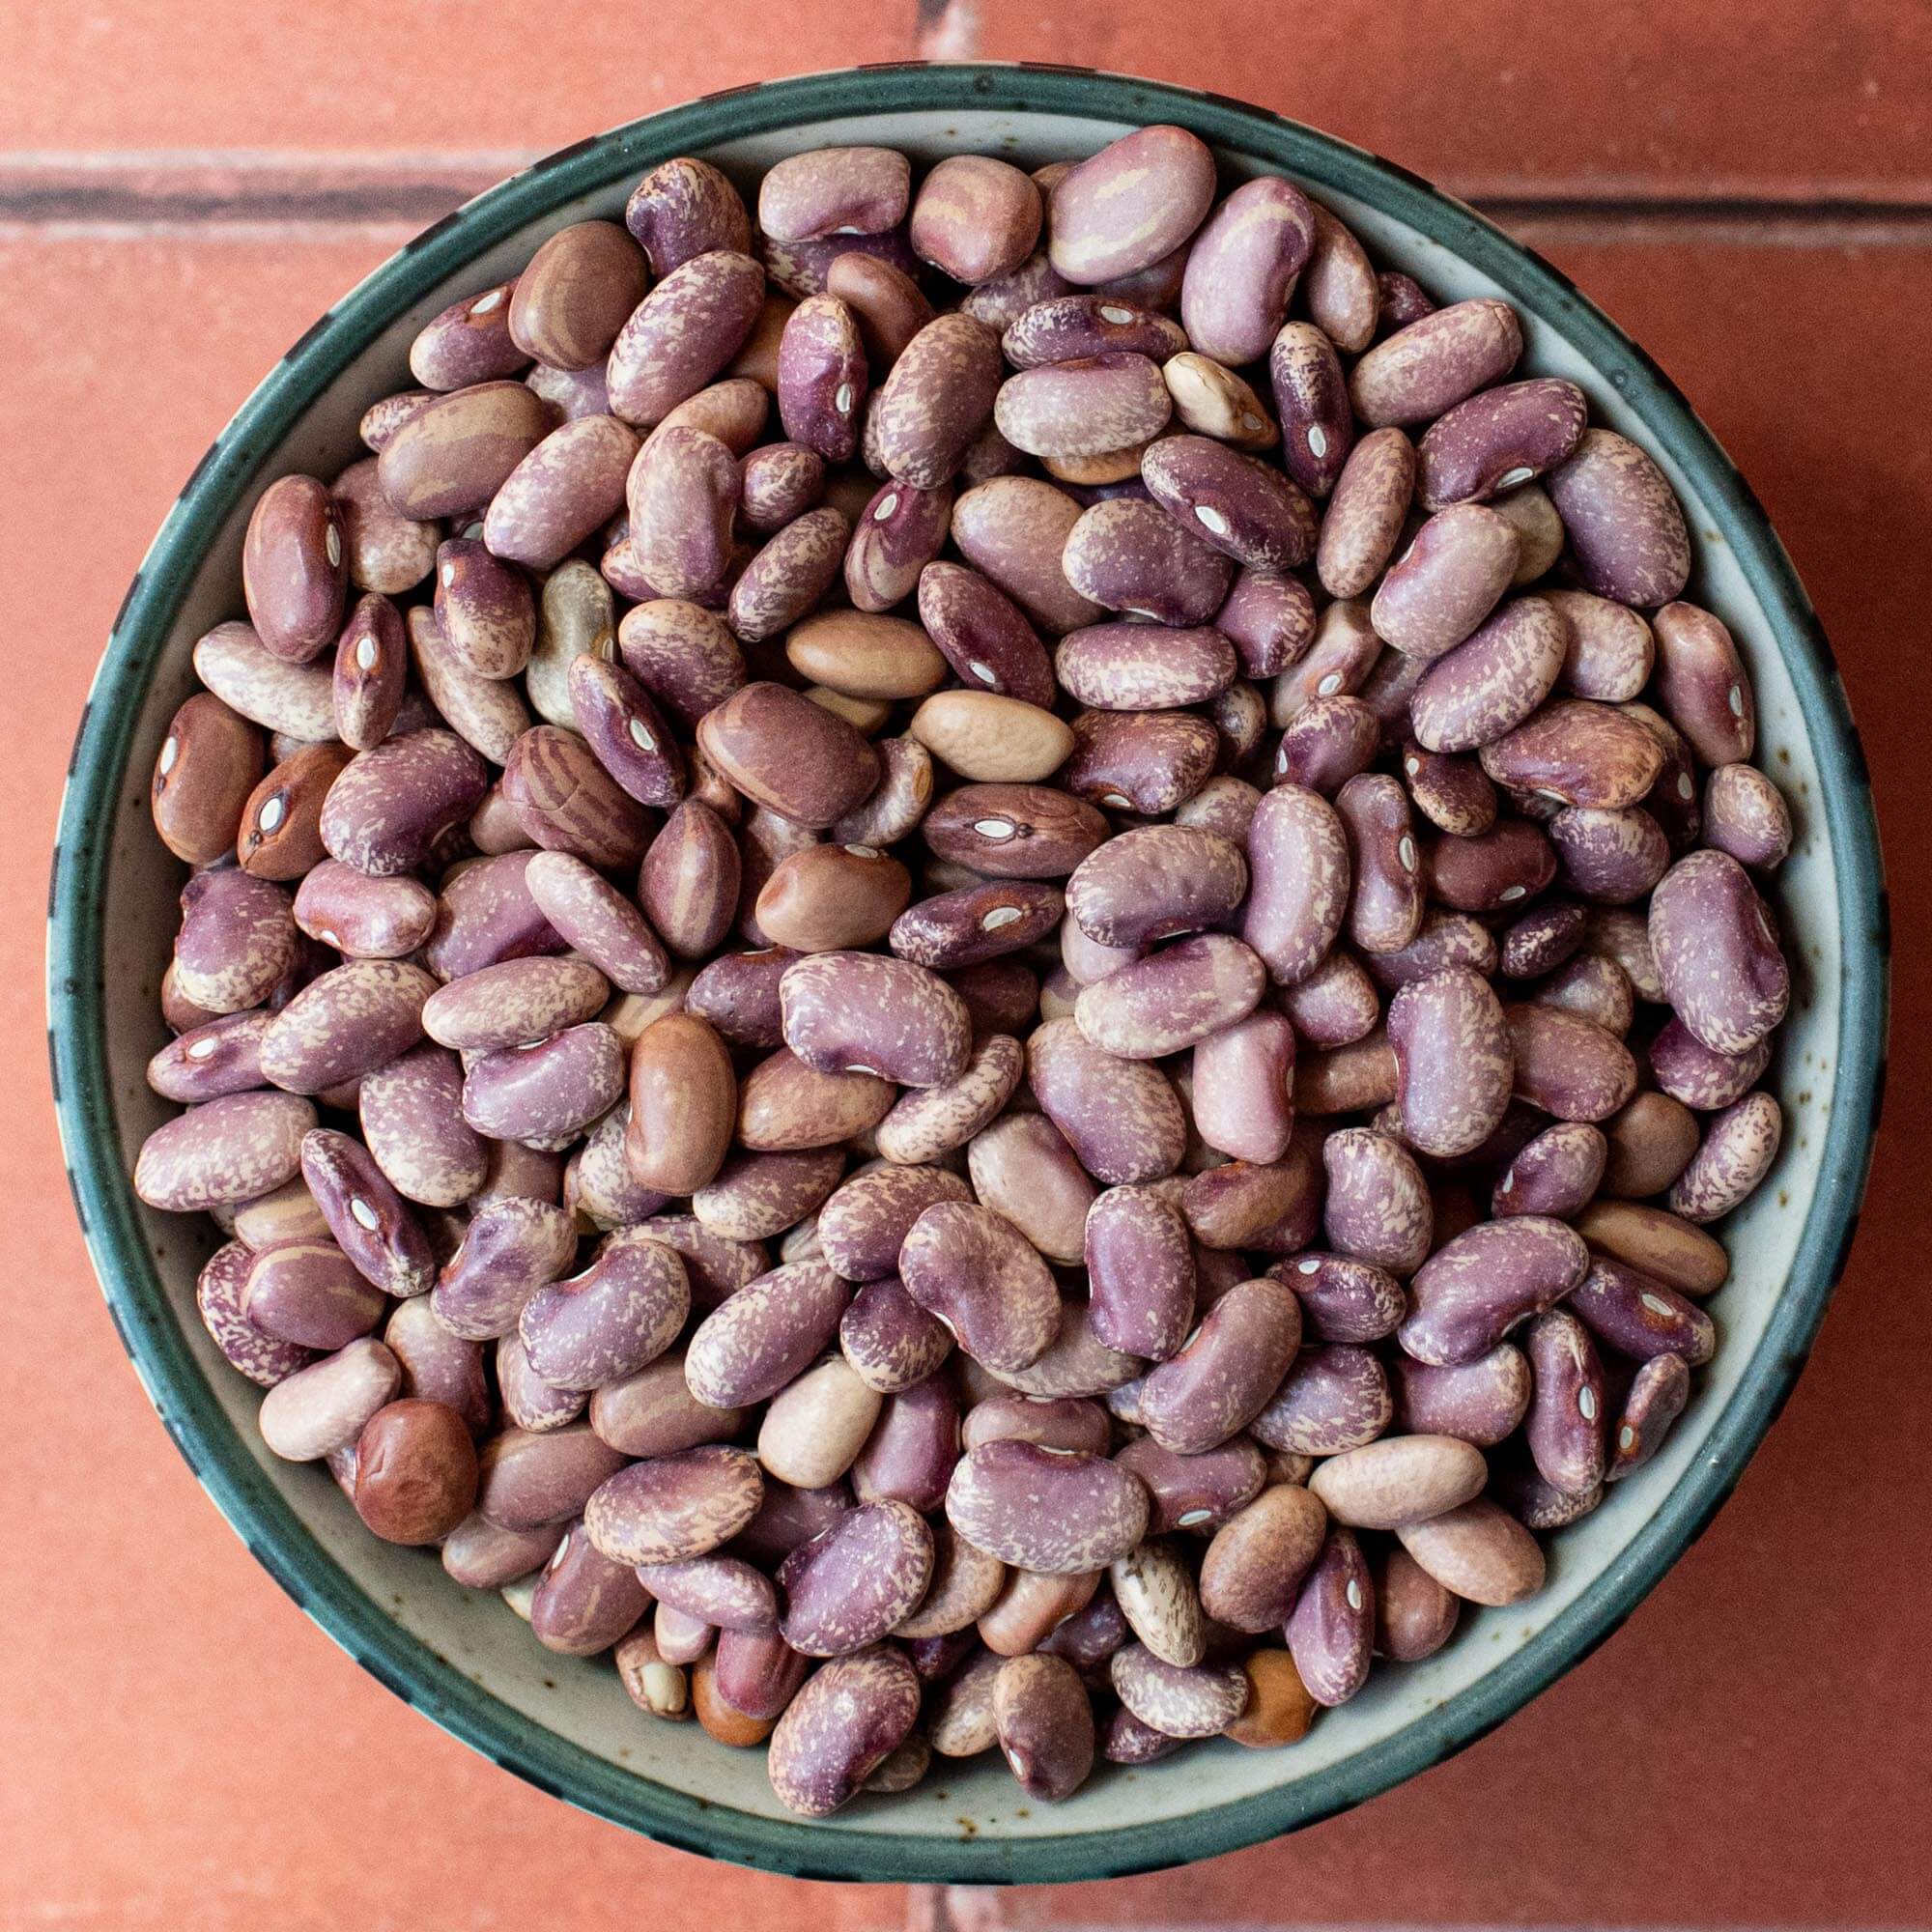 Organic Primary Beans Flor de Mayo beans